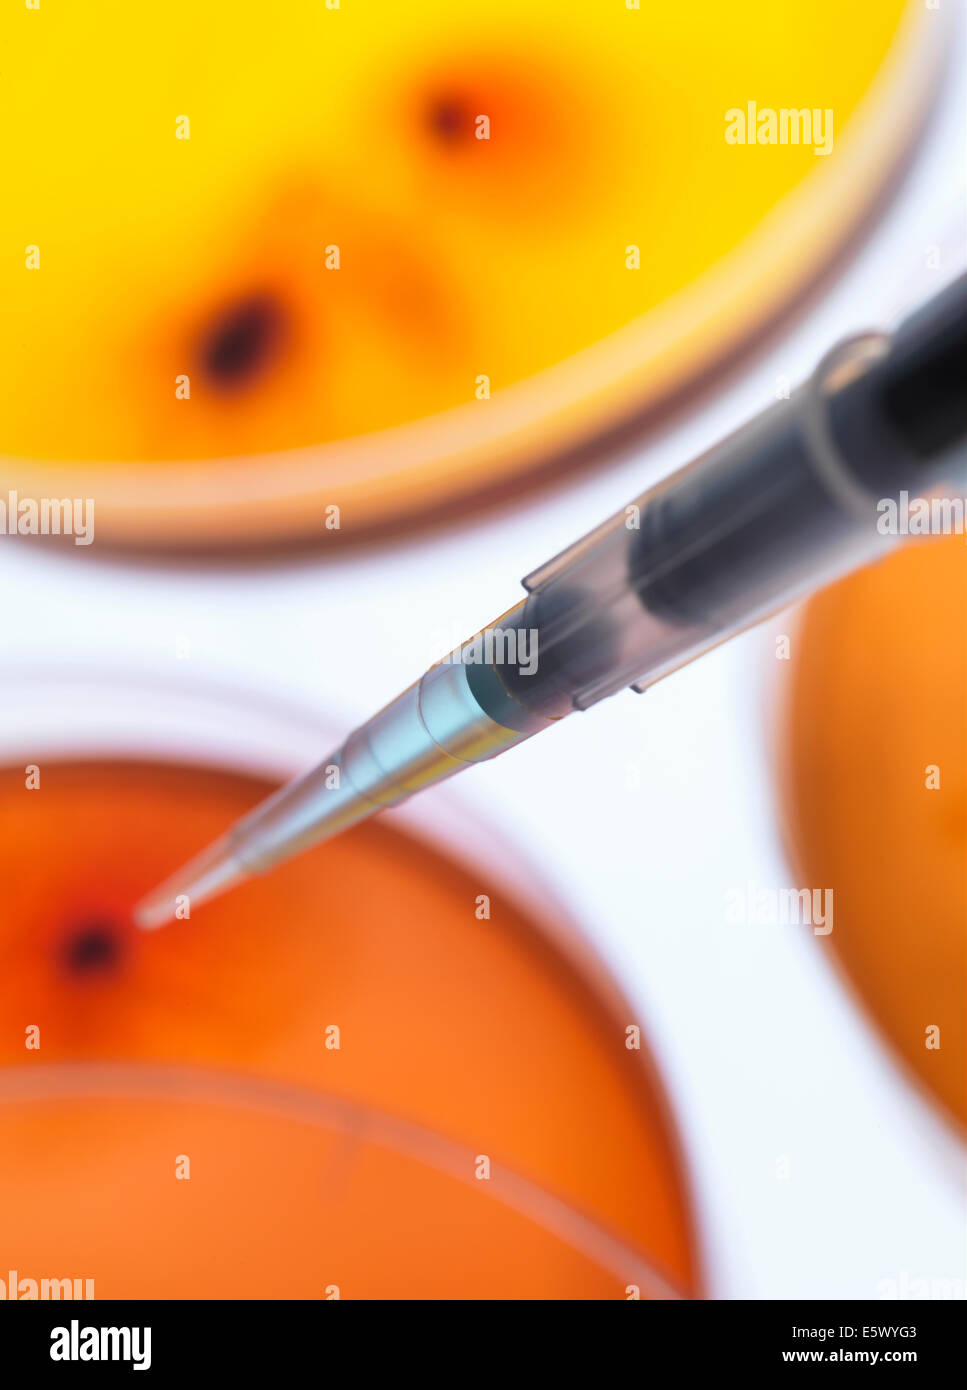 Scientist pipetting sample into a petri dish containing cultured bacteria in a microbiology lab Stock Photo